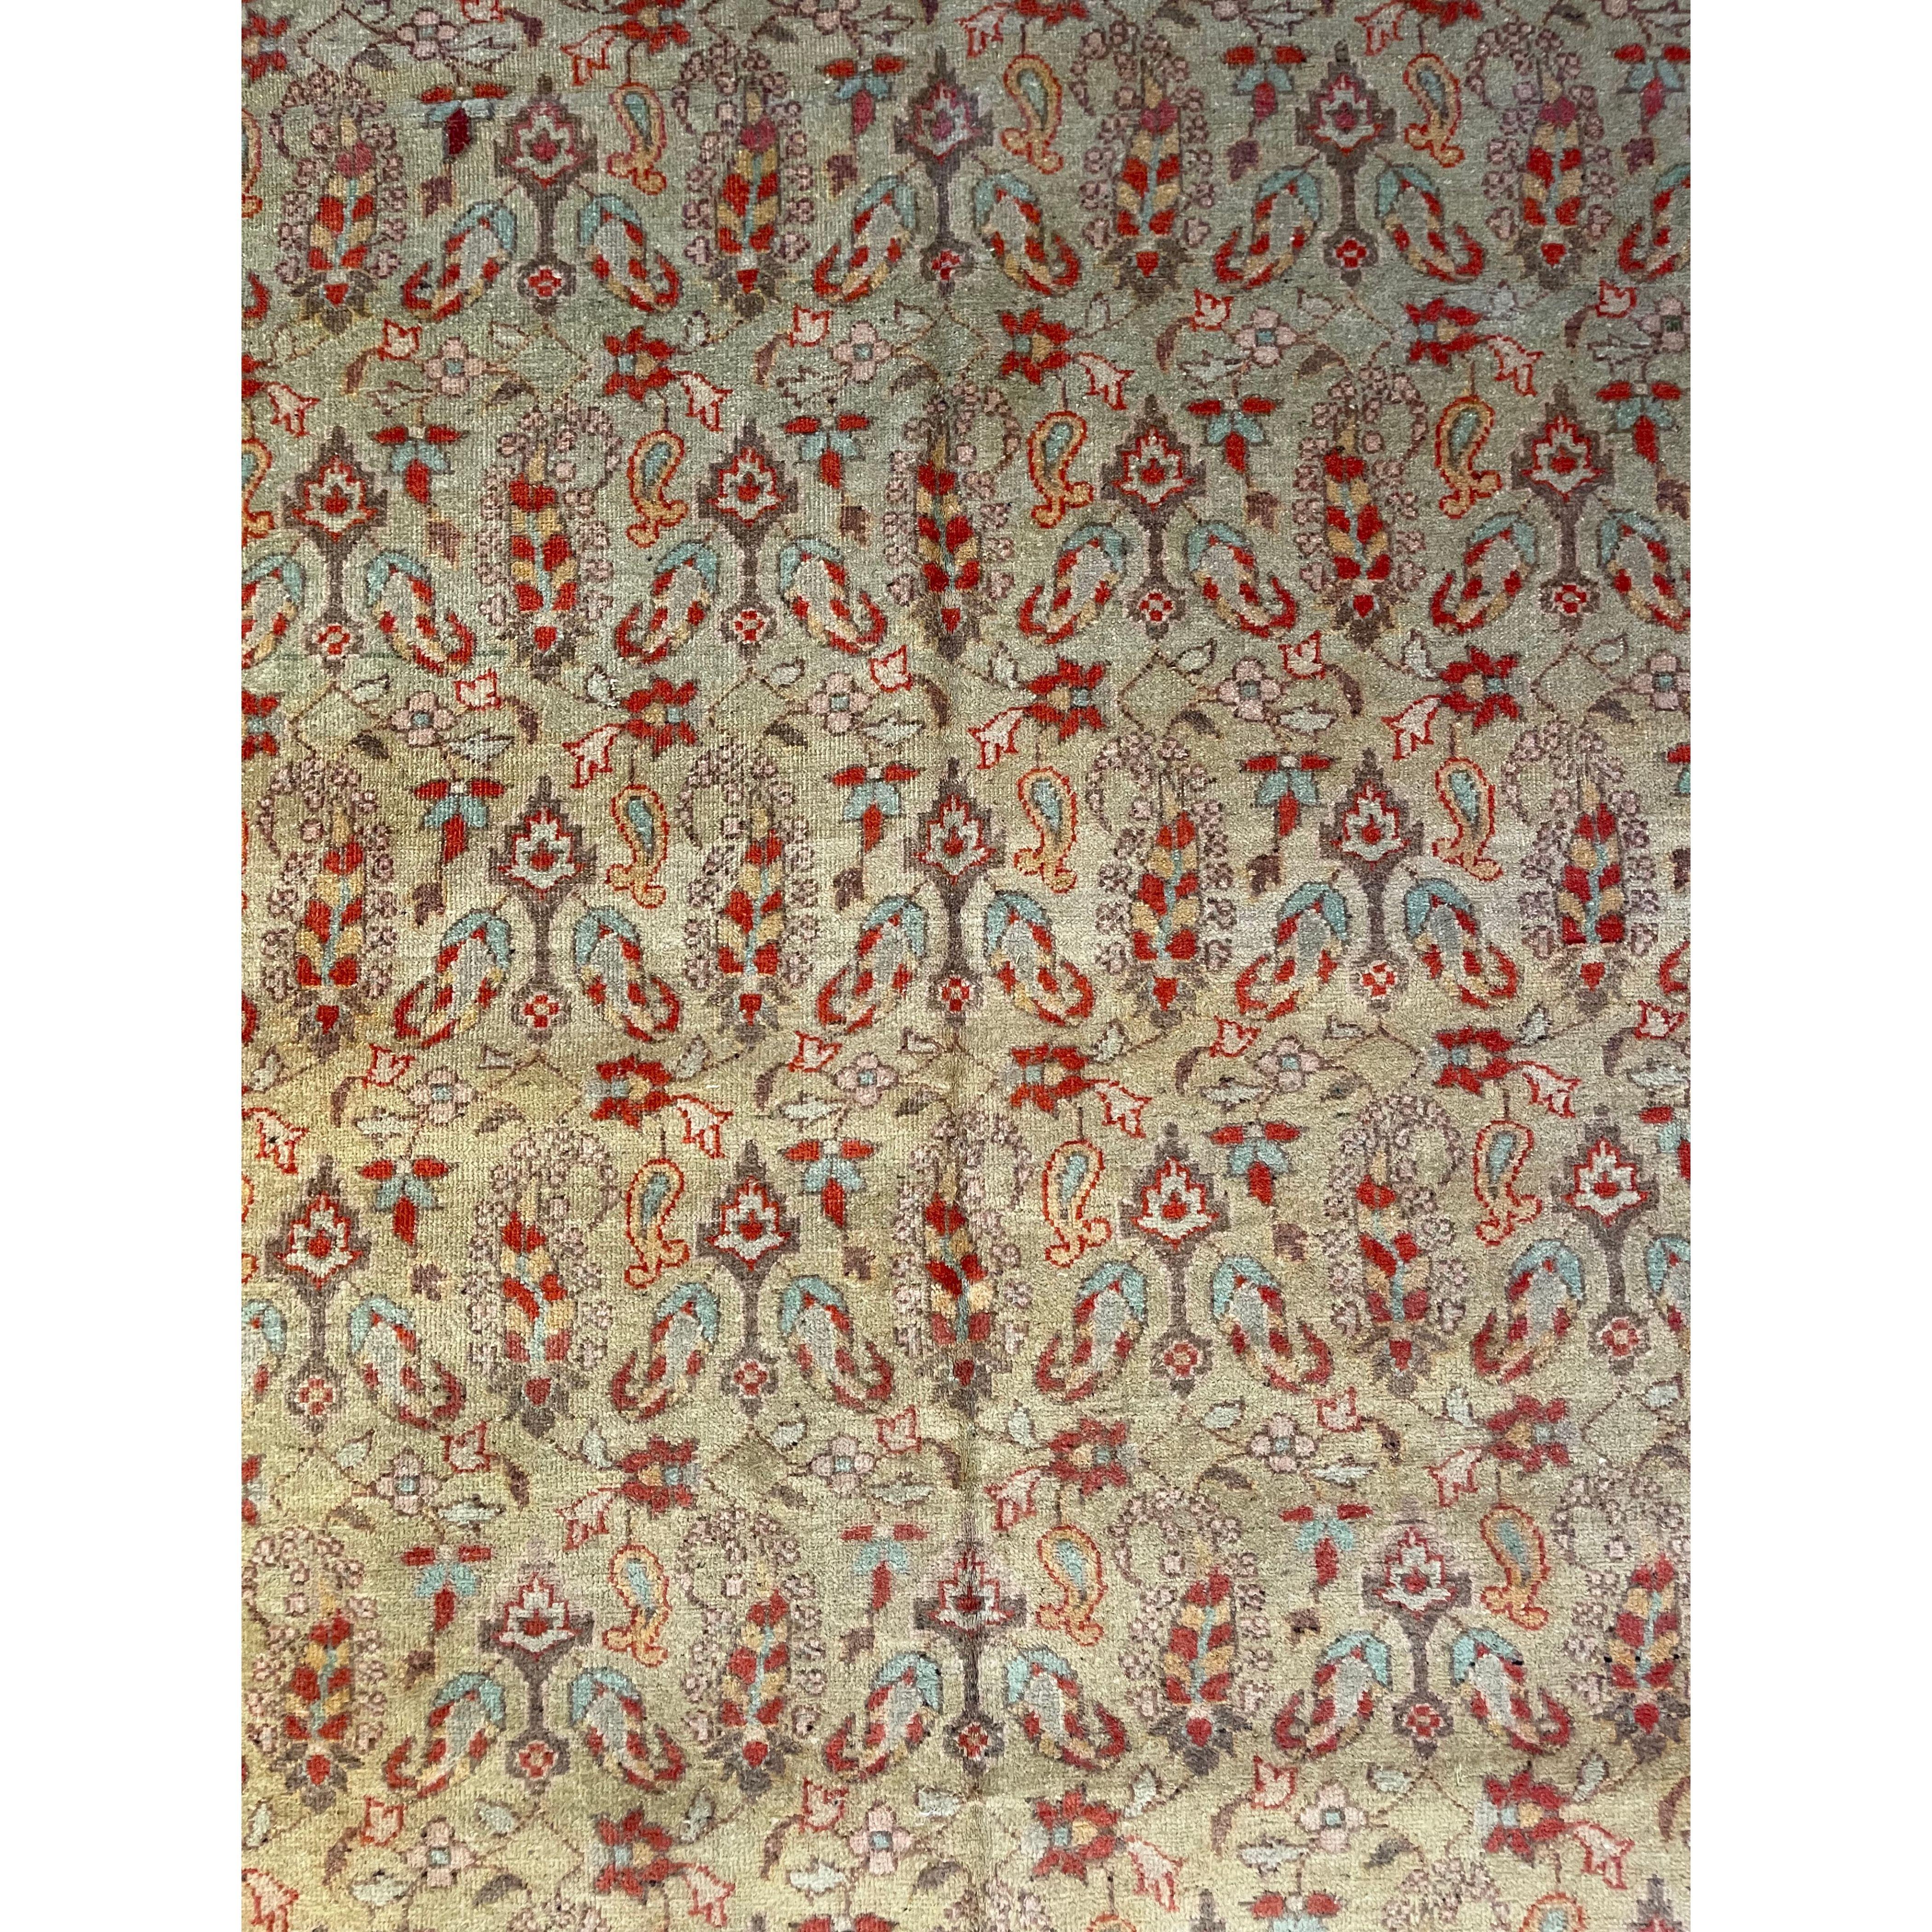 Empire 1900s Antique Indian Amritsar Rug - 11'10'' X 9'6'' For Sale